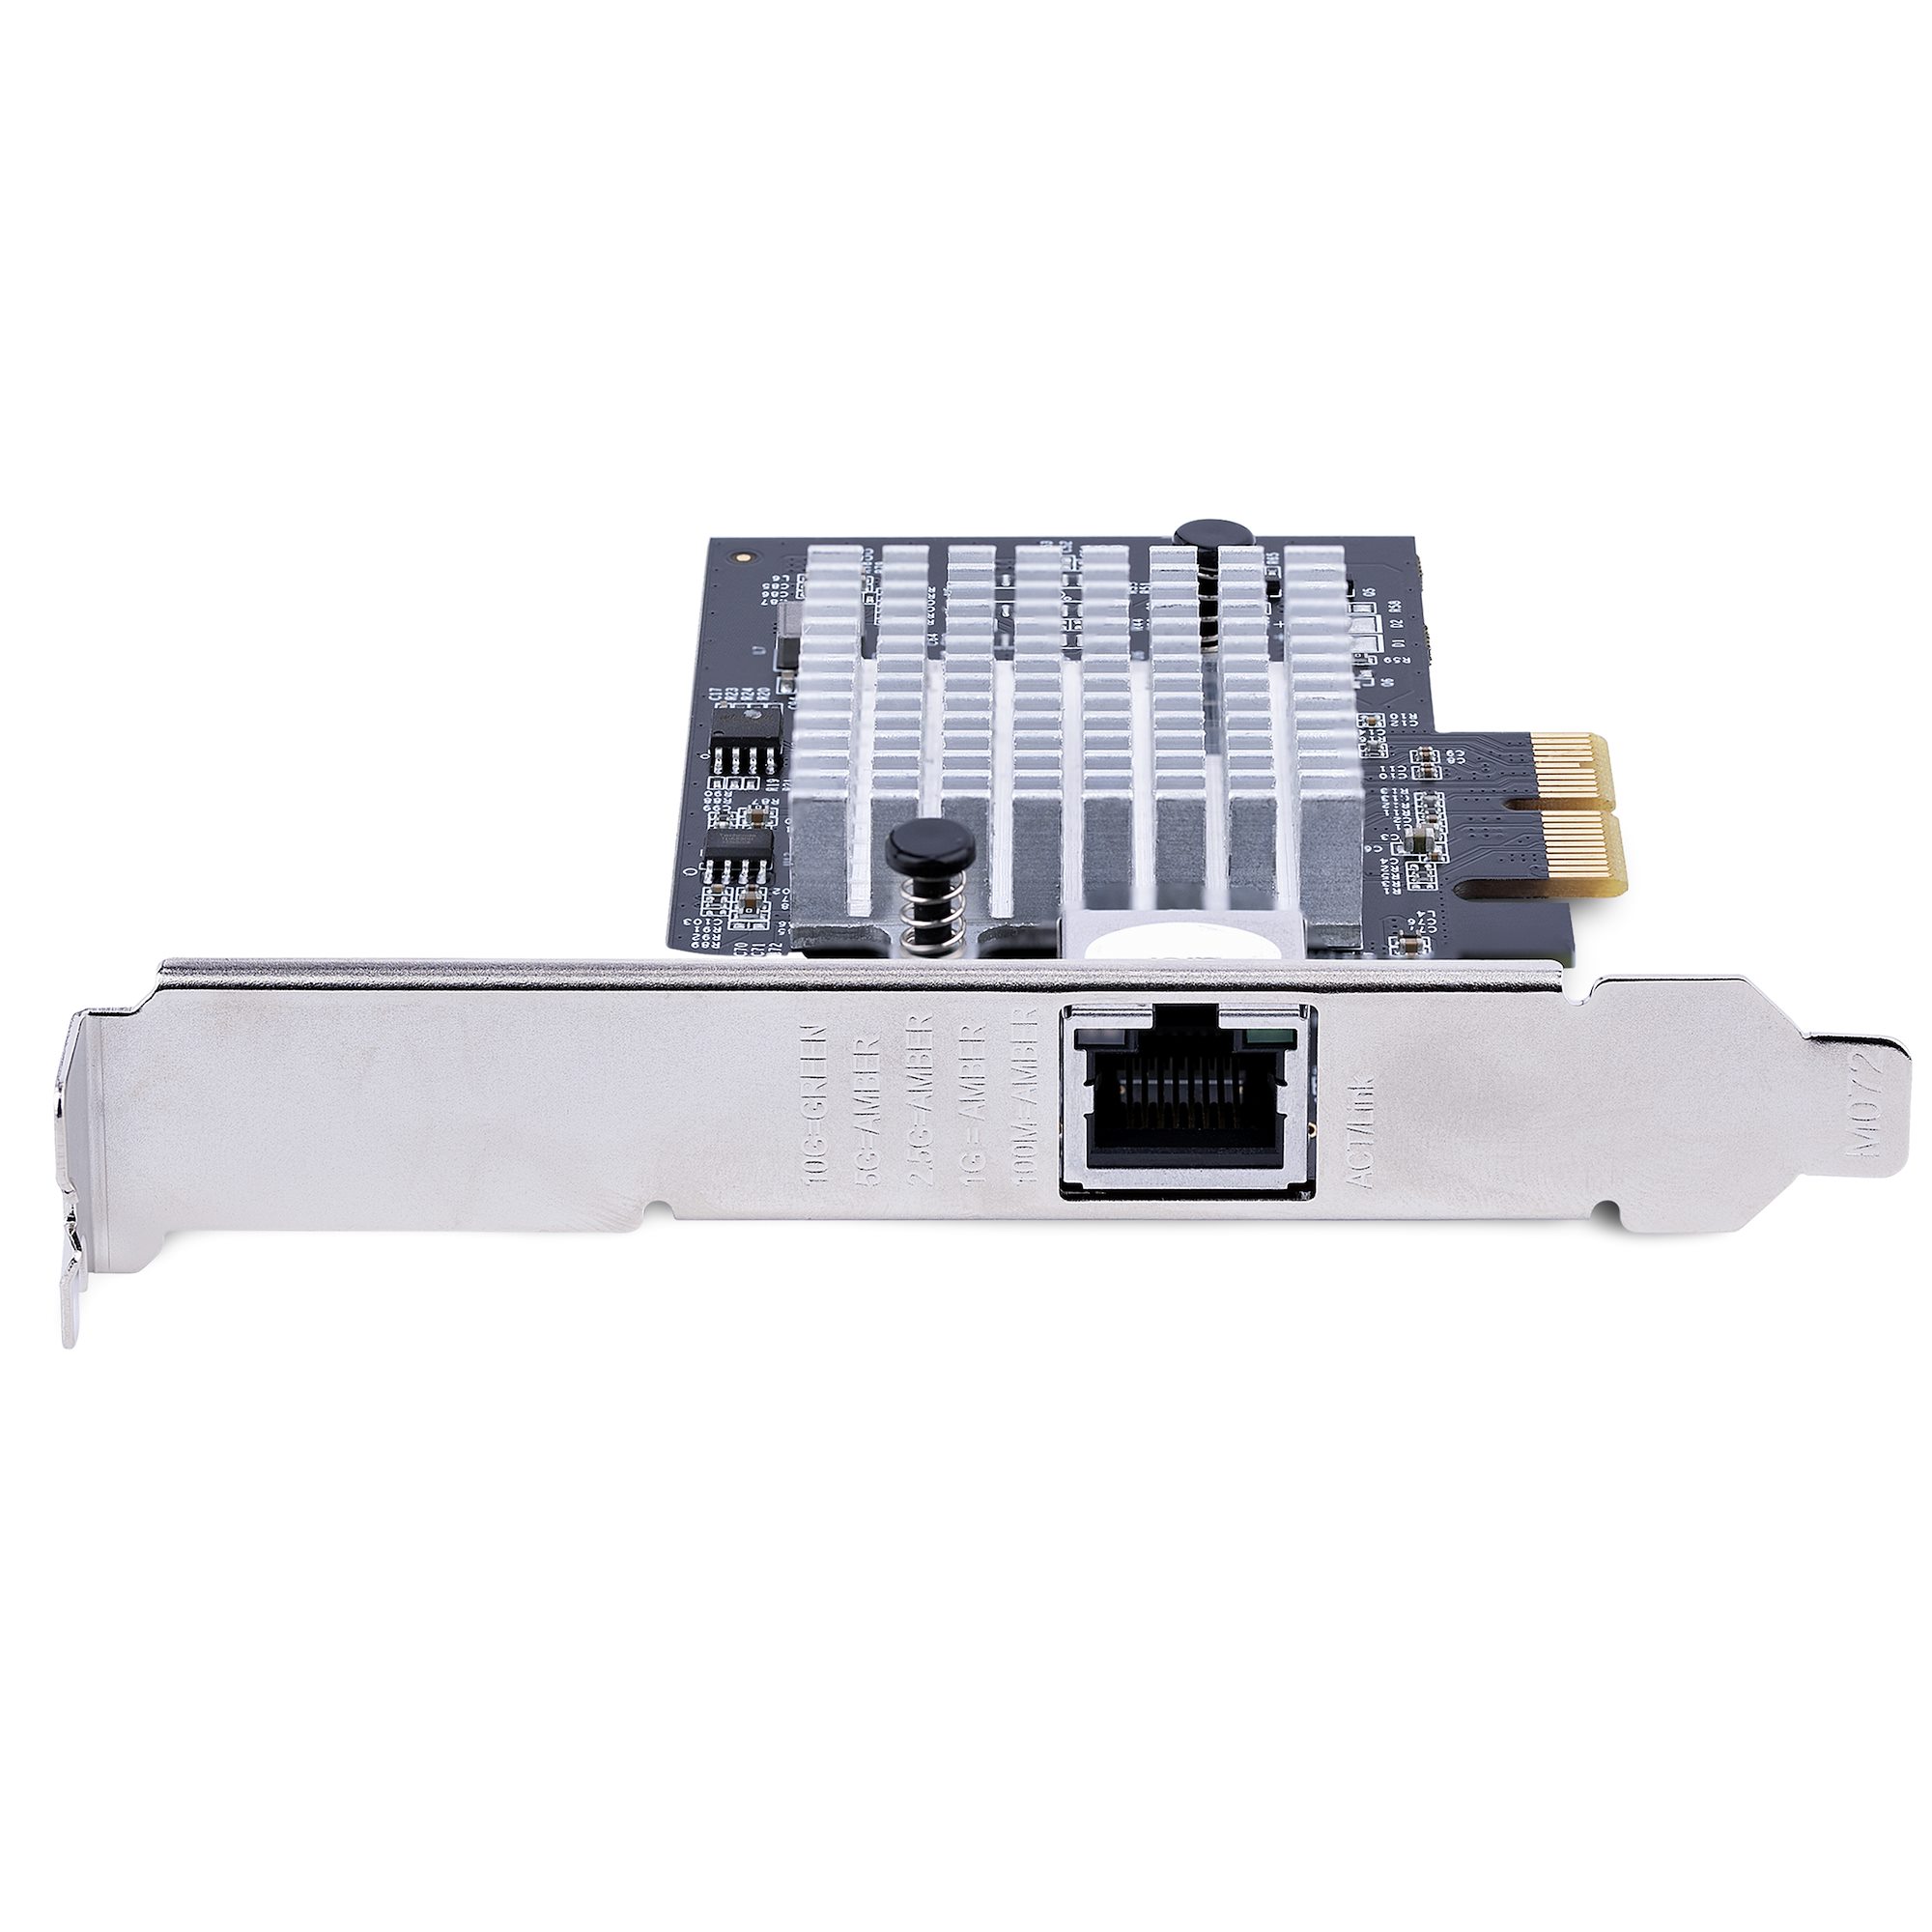 1-Port 10Gbps PCIe Network Adapter Card - ネットワークアダプタ